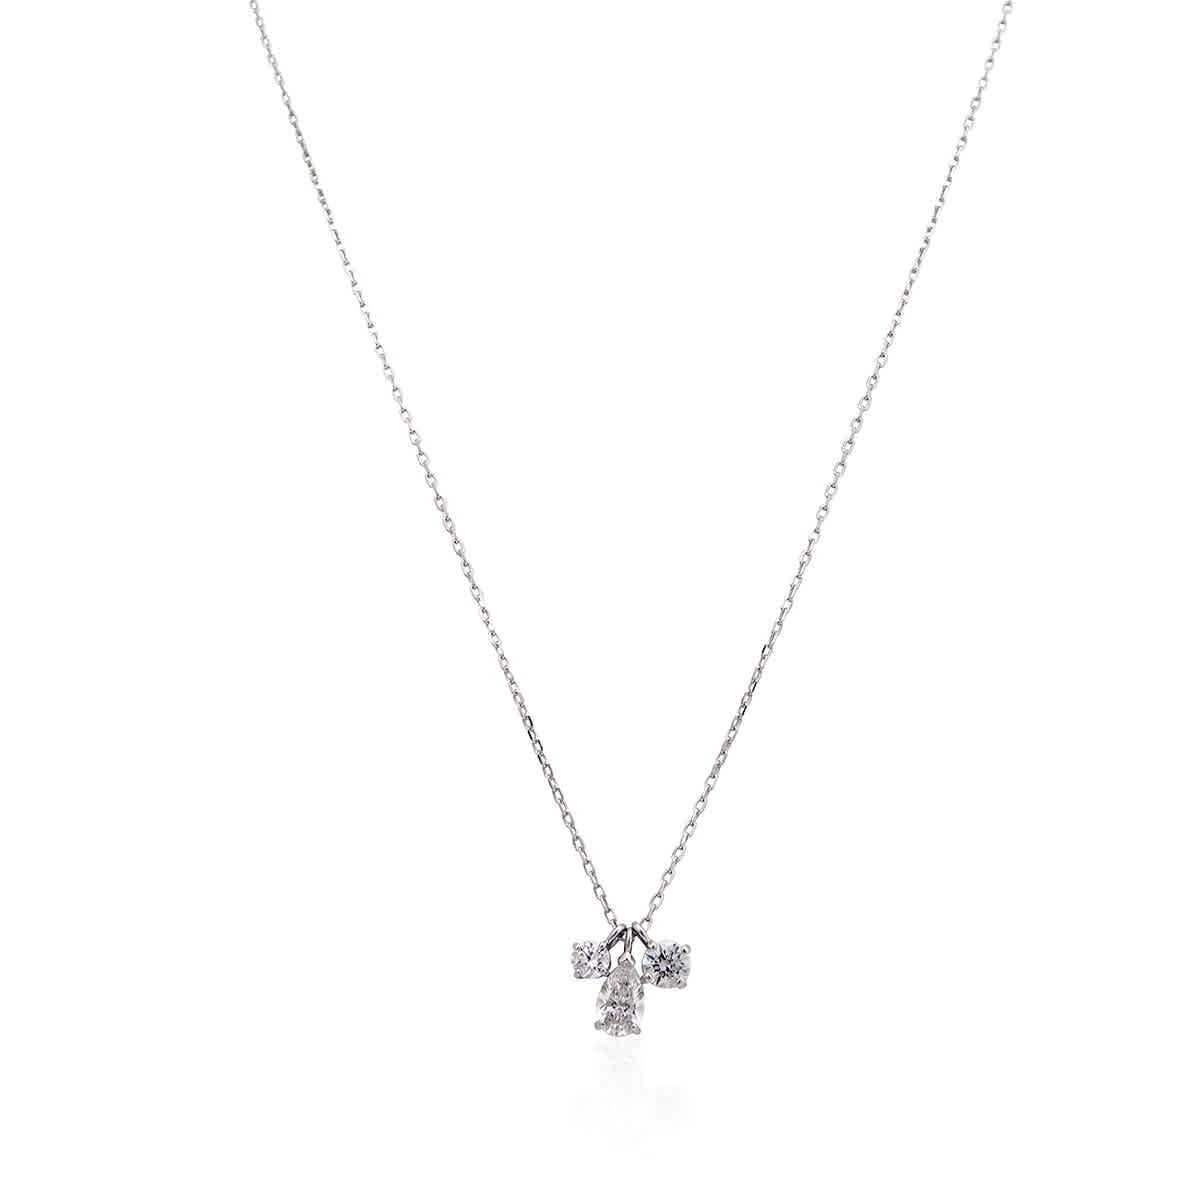 Swarovski Attract Crystal Ketting Cluster Pendant Necklace